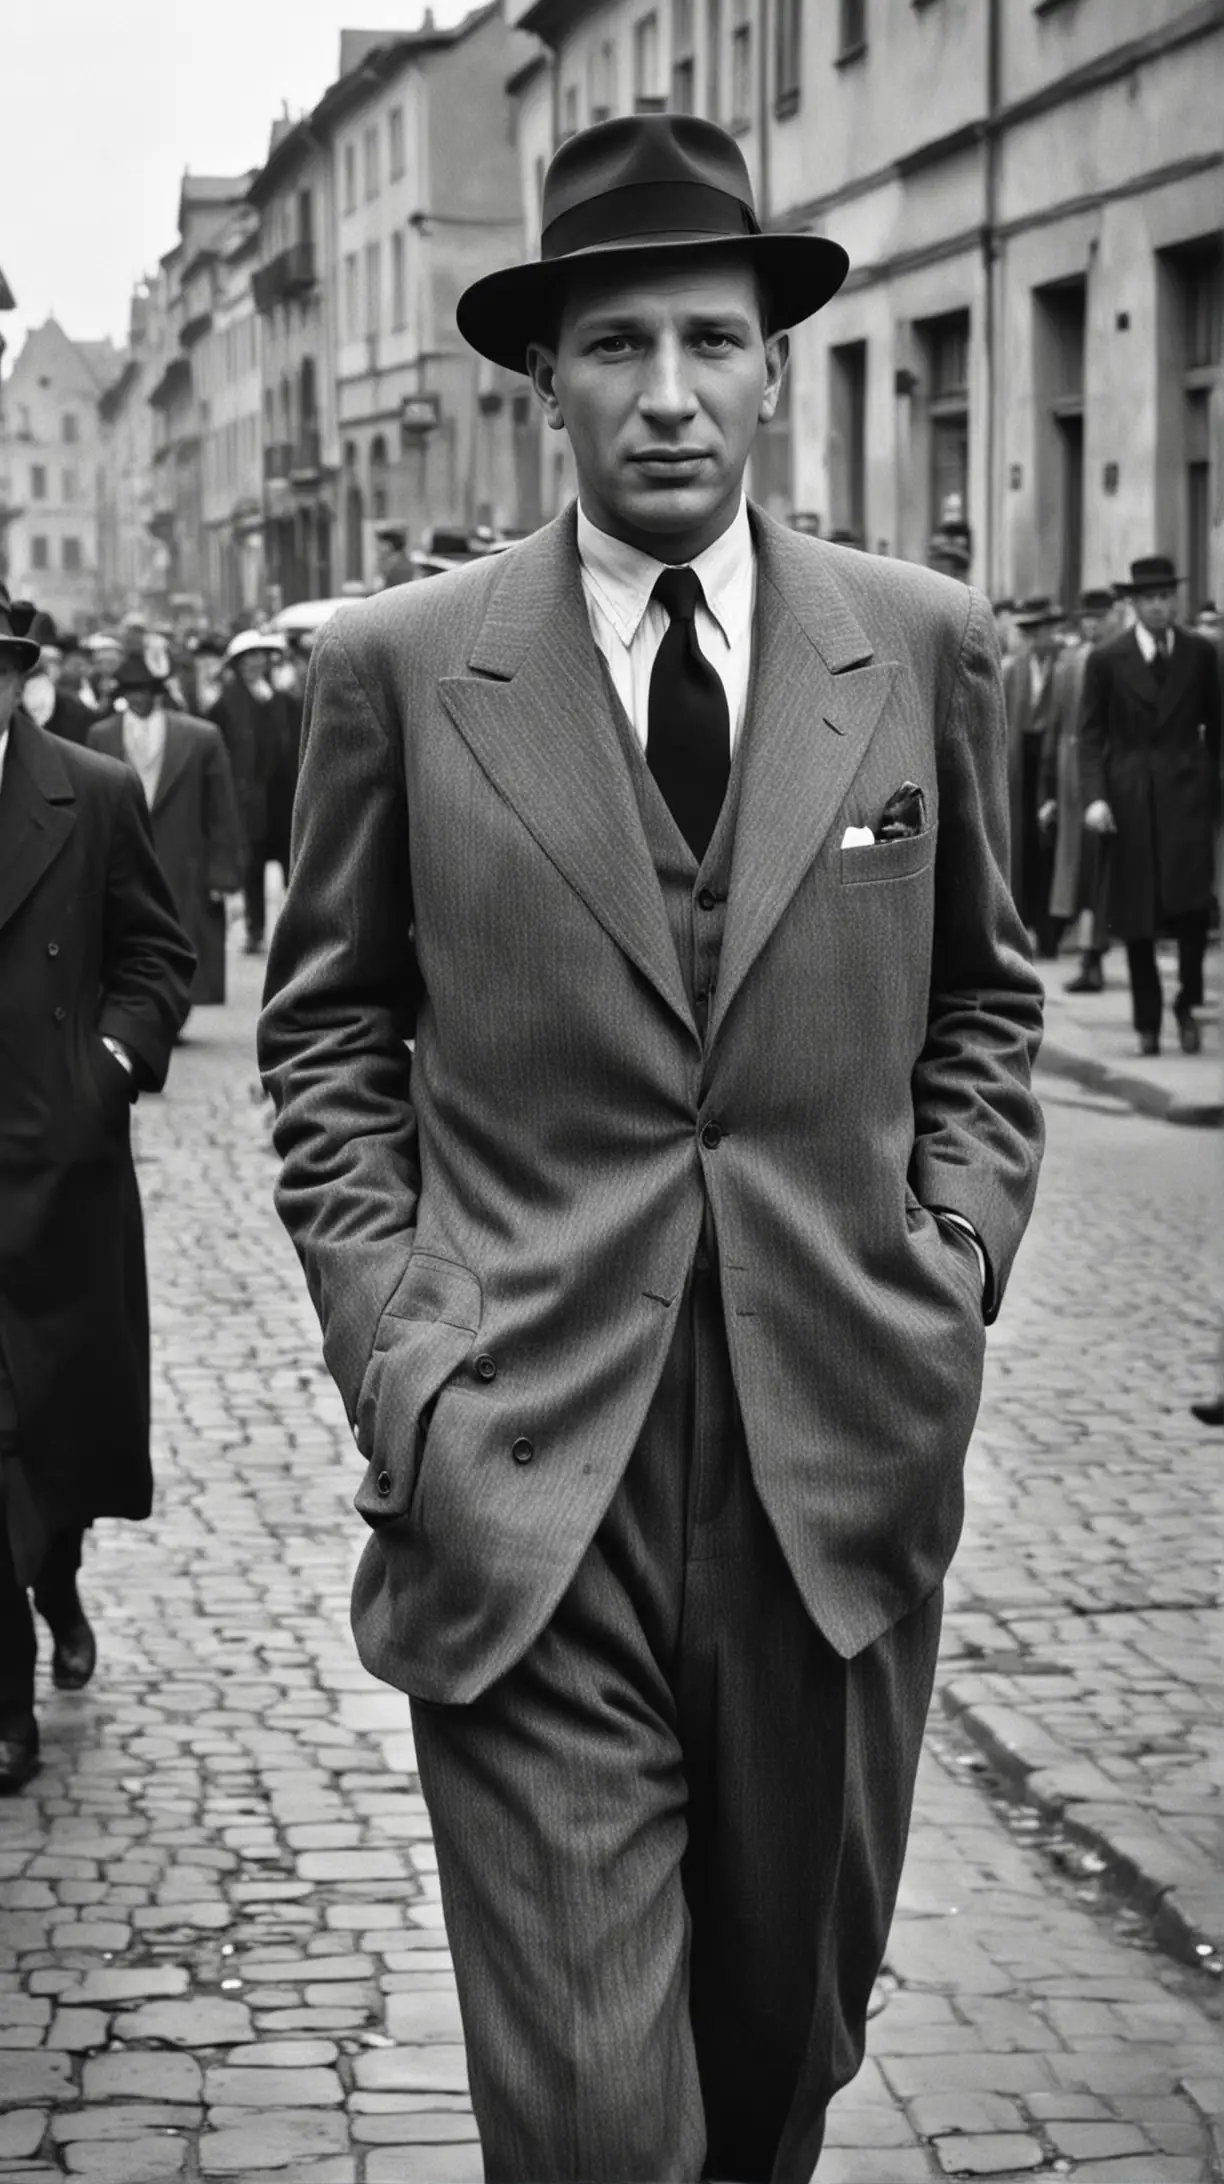 Oskar Schindler in a stylish suit, in a busy Krakow street, 1939: Depict Oskar Schindler, a well-dressed, charismatic businessman with a confident demeanor, walking down a bustling street in Krakow, with period-appropriate buildings and vehicles in the background.